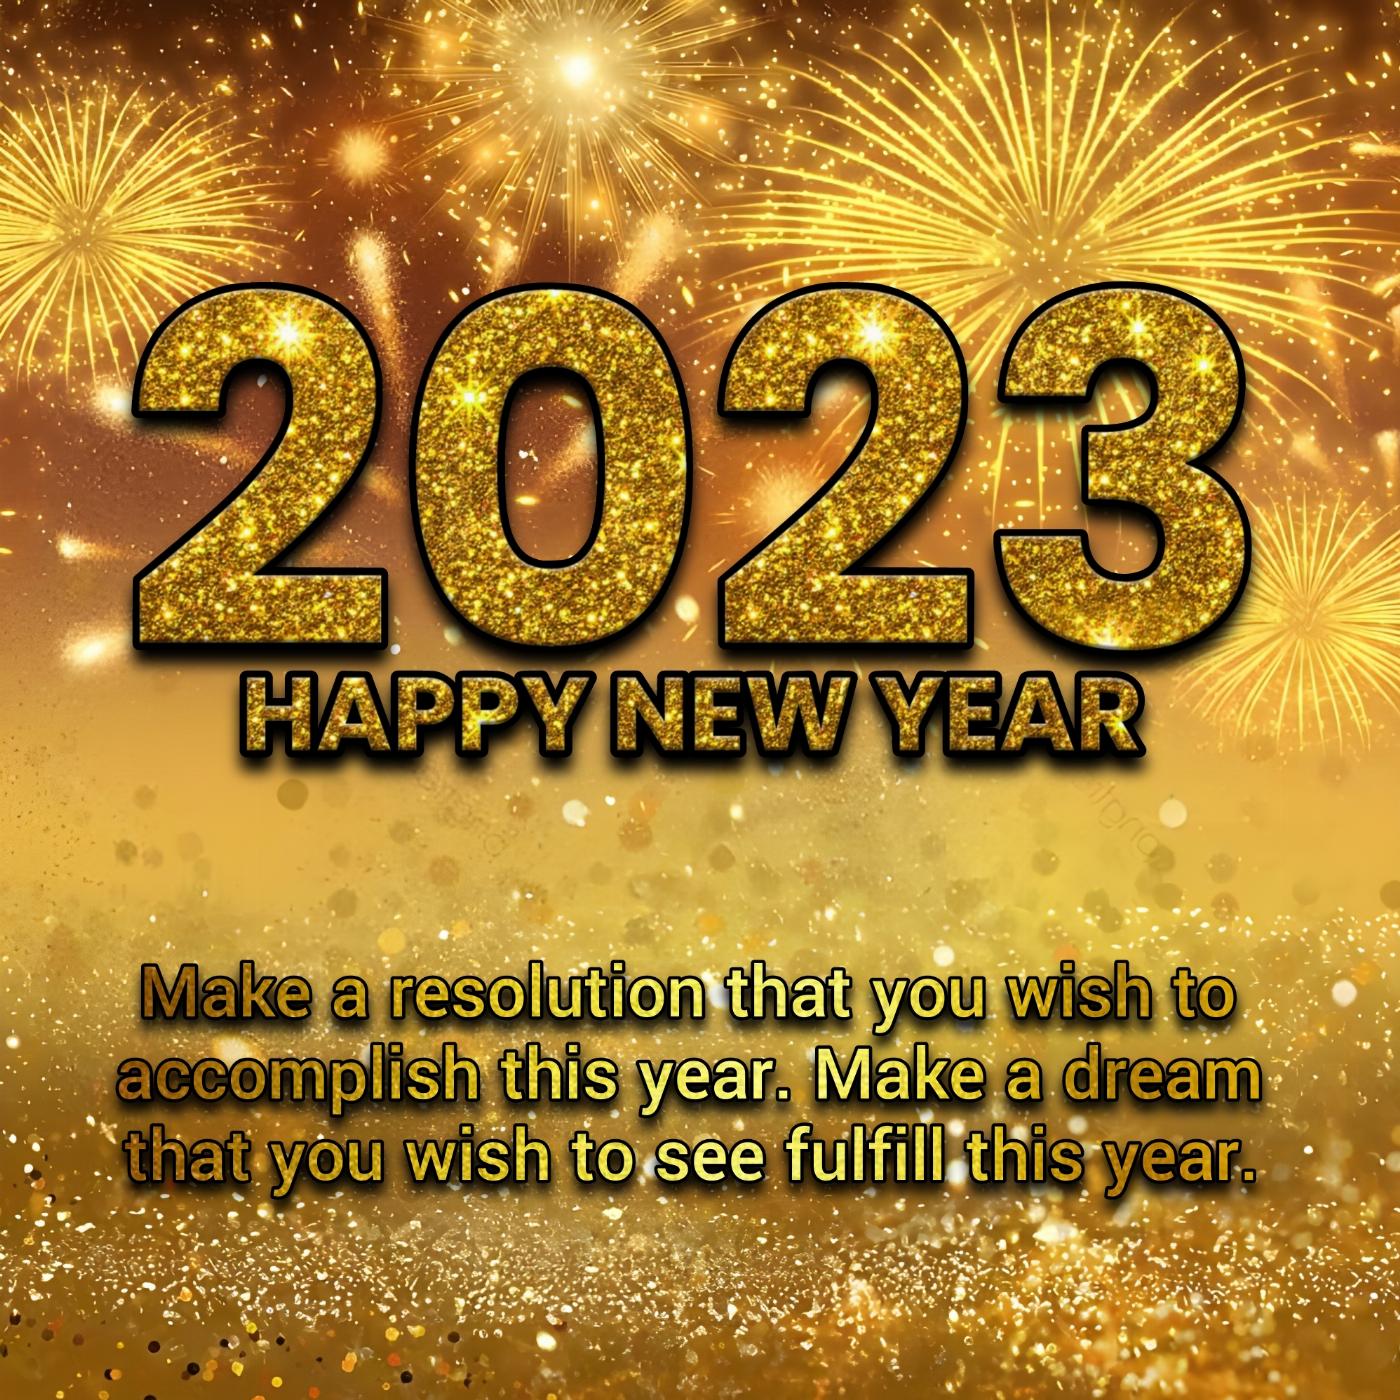 Make a resolution that you wish to accomplish this year